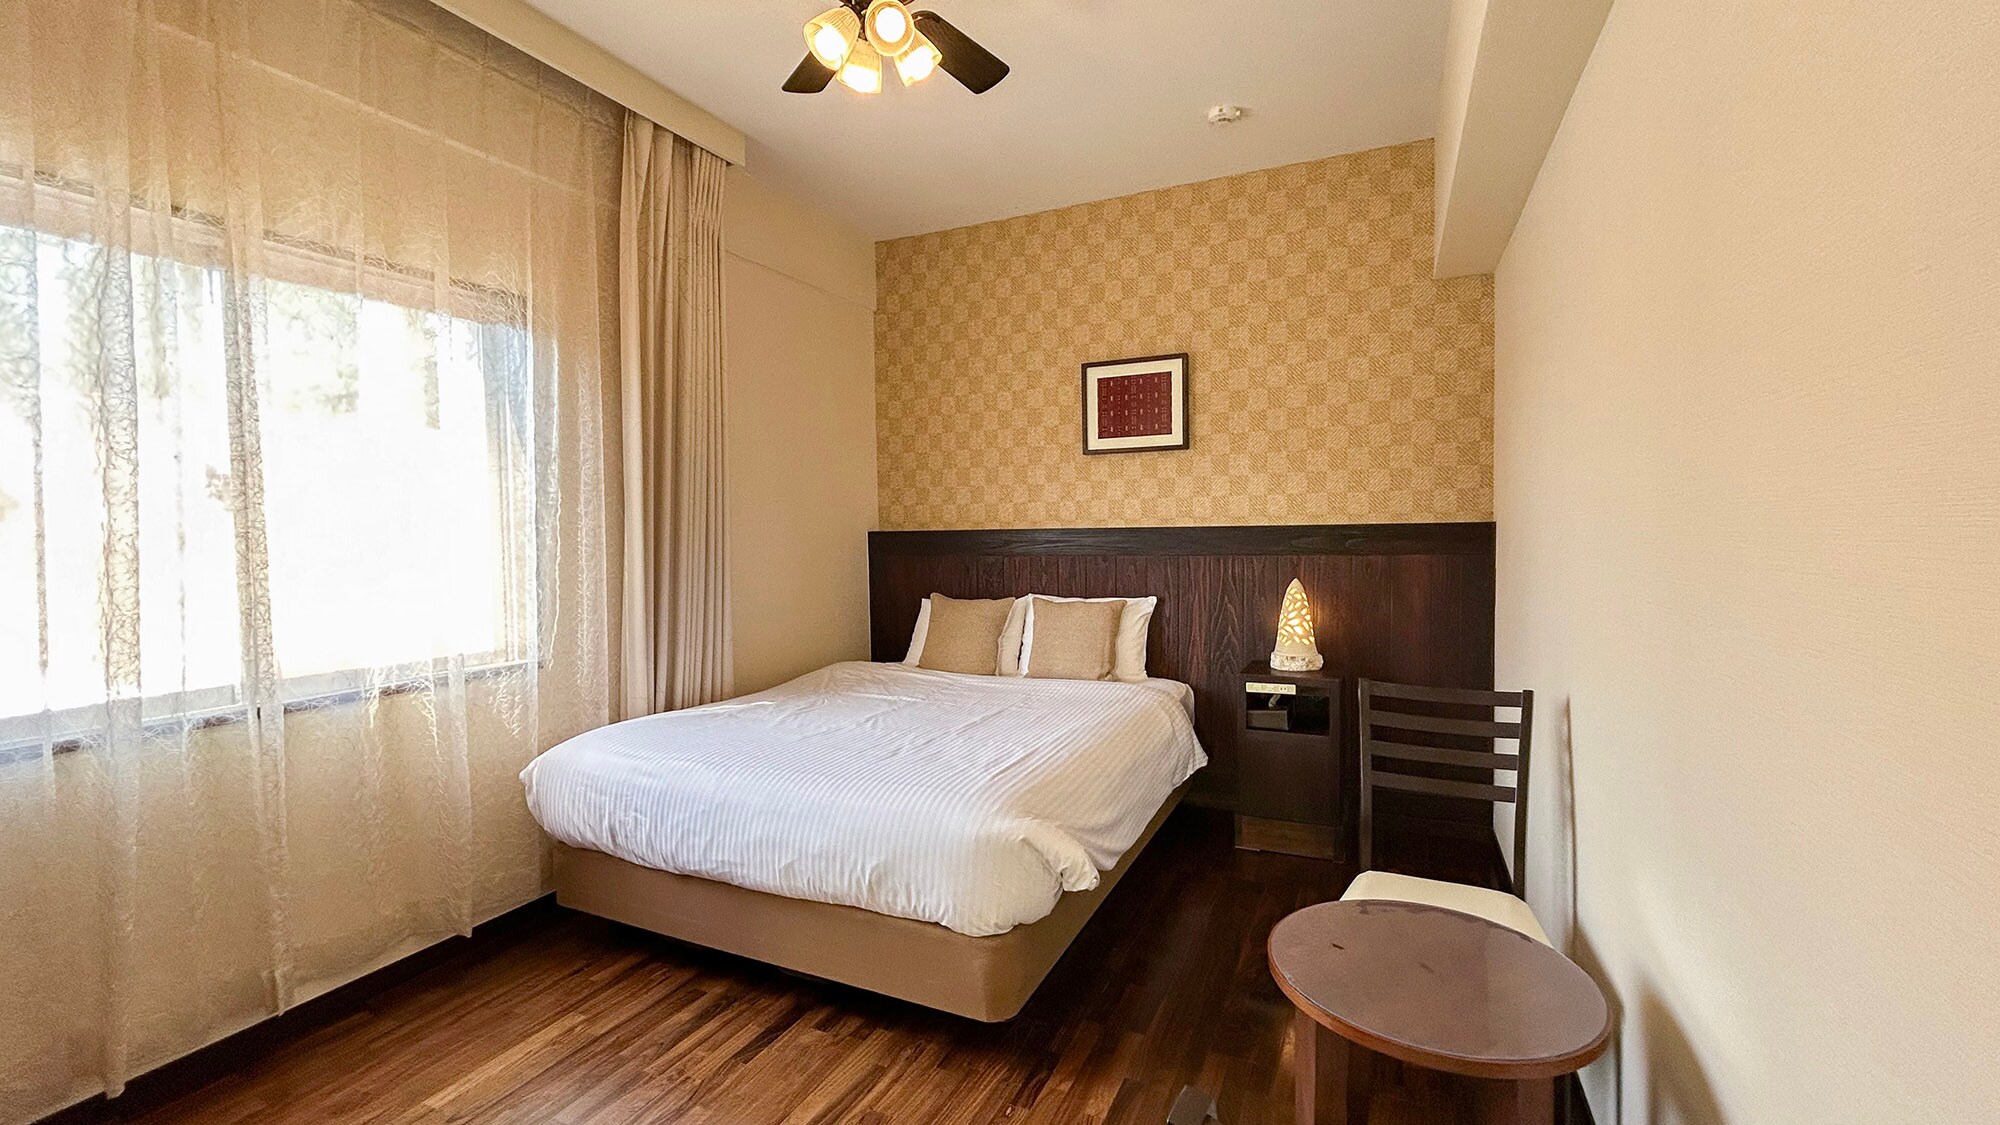 ・[Double room] This room can accommodate up to 2 people.